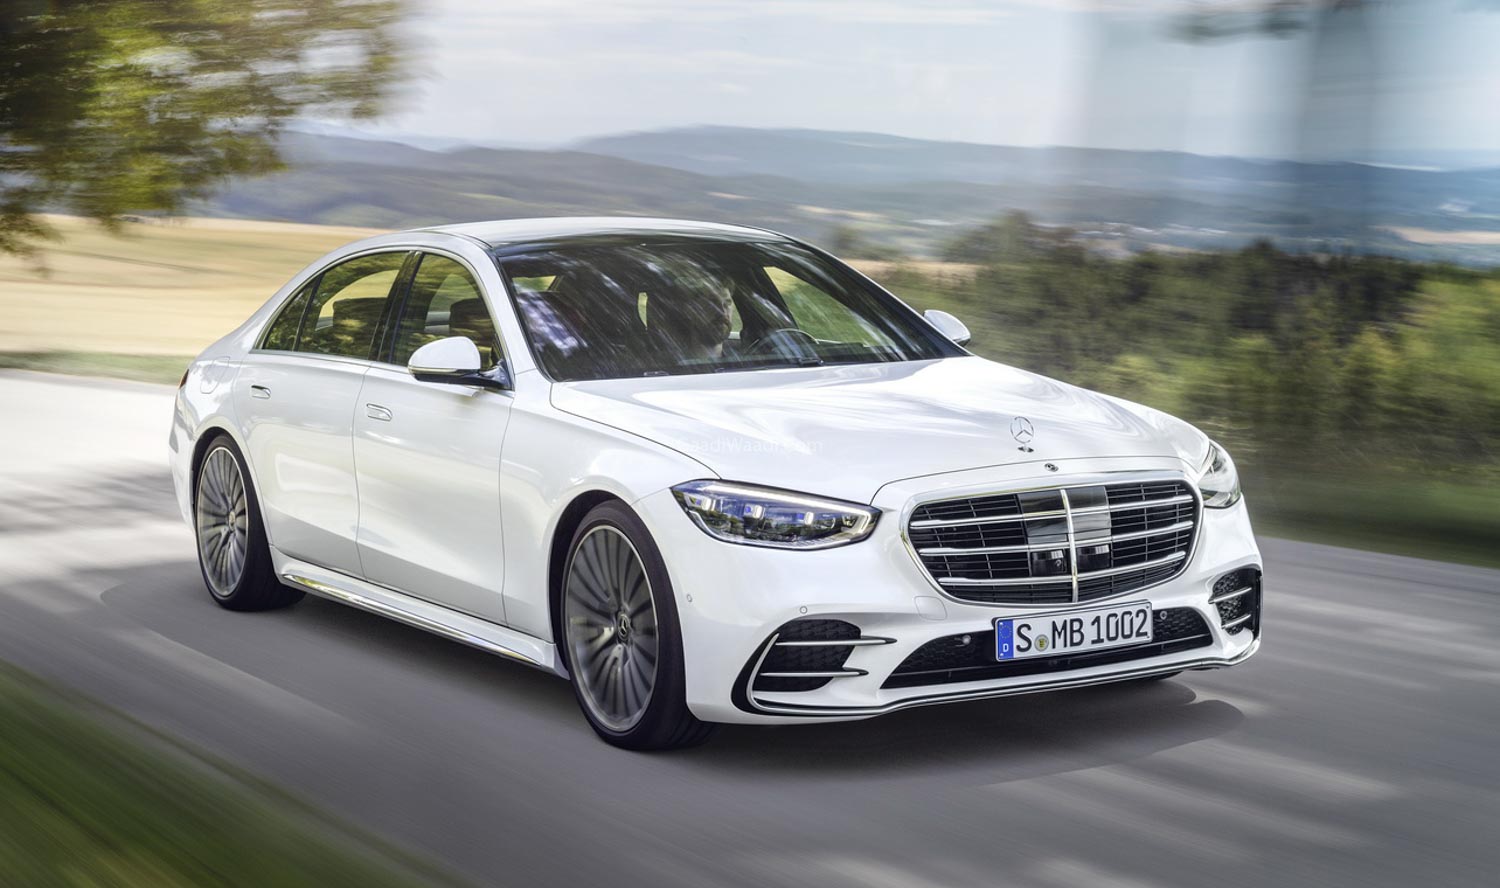 2021 Mercedes Benz S Class Prices Announced In Germany